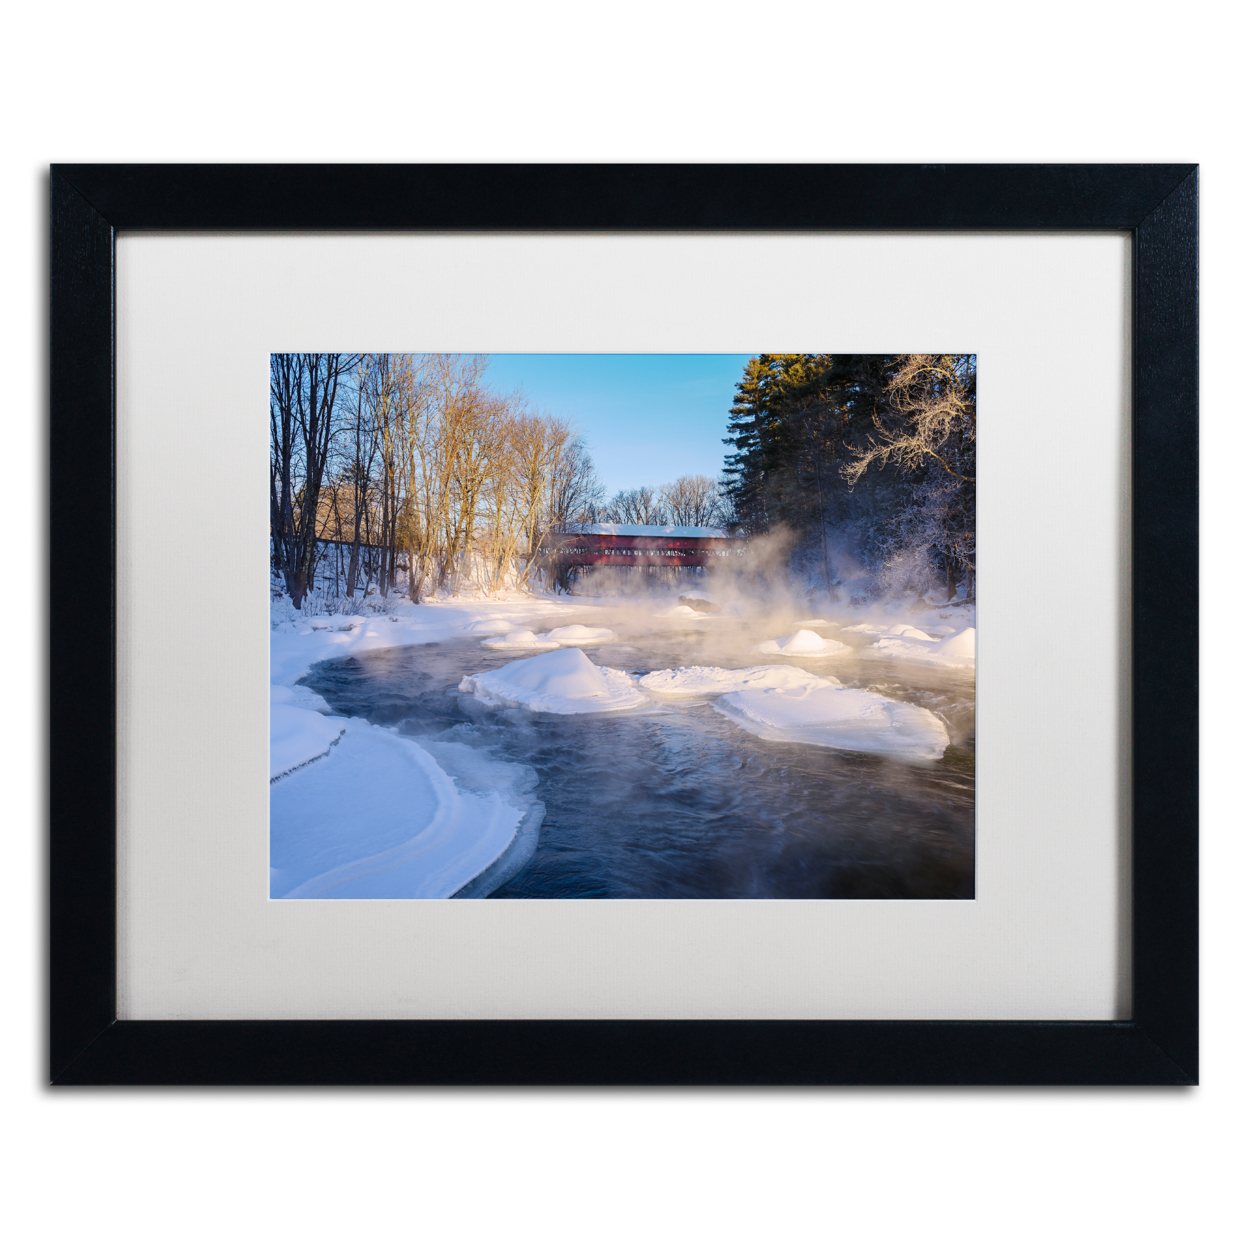 Michael Blanchette Photography 'Smoking River' Black Wooden Framed Art 18 X 22 Inches